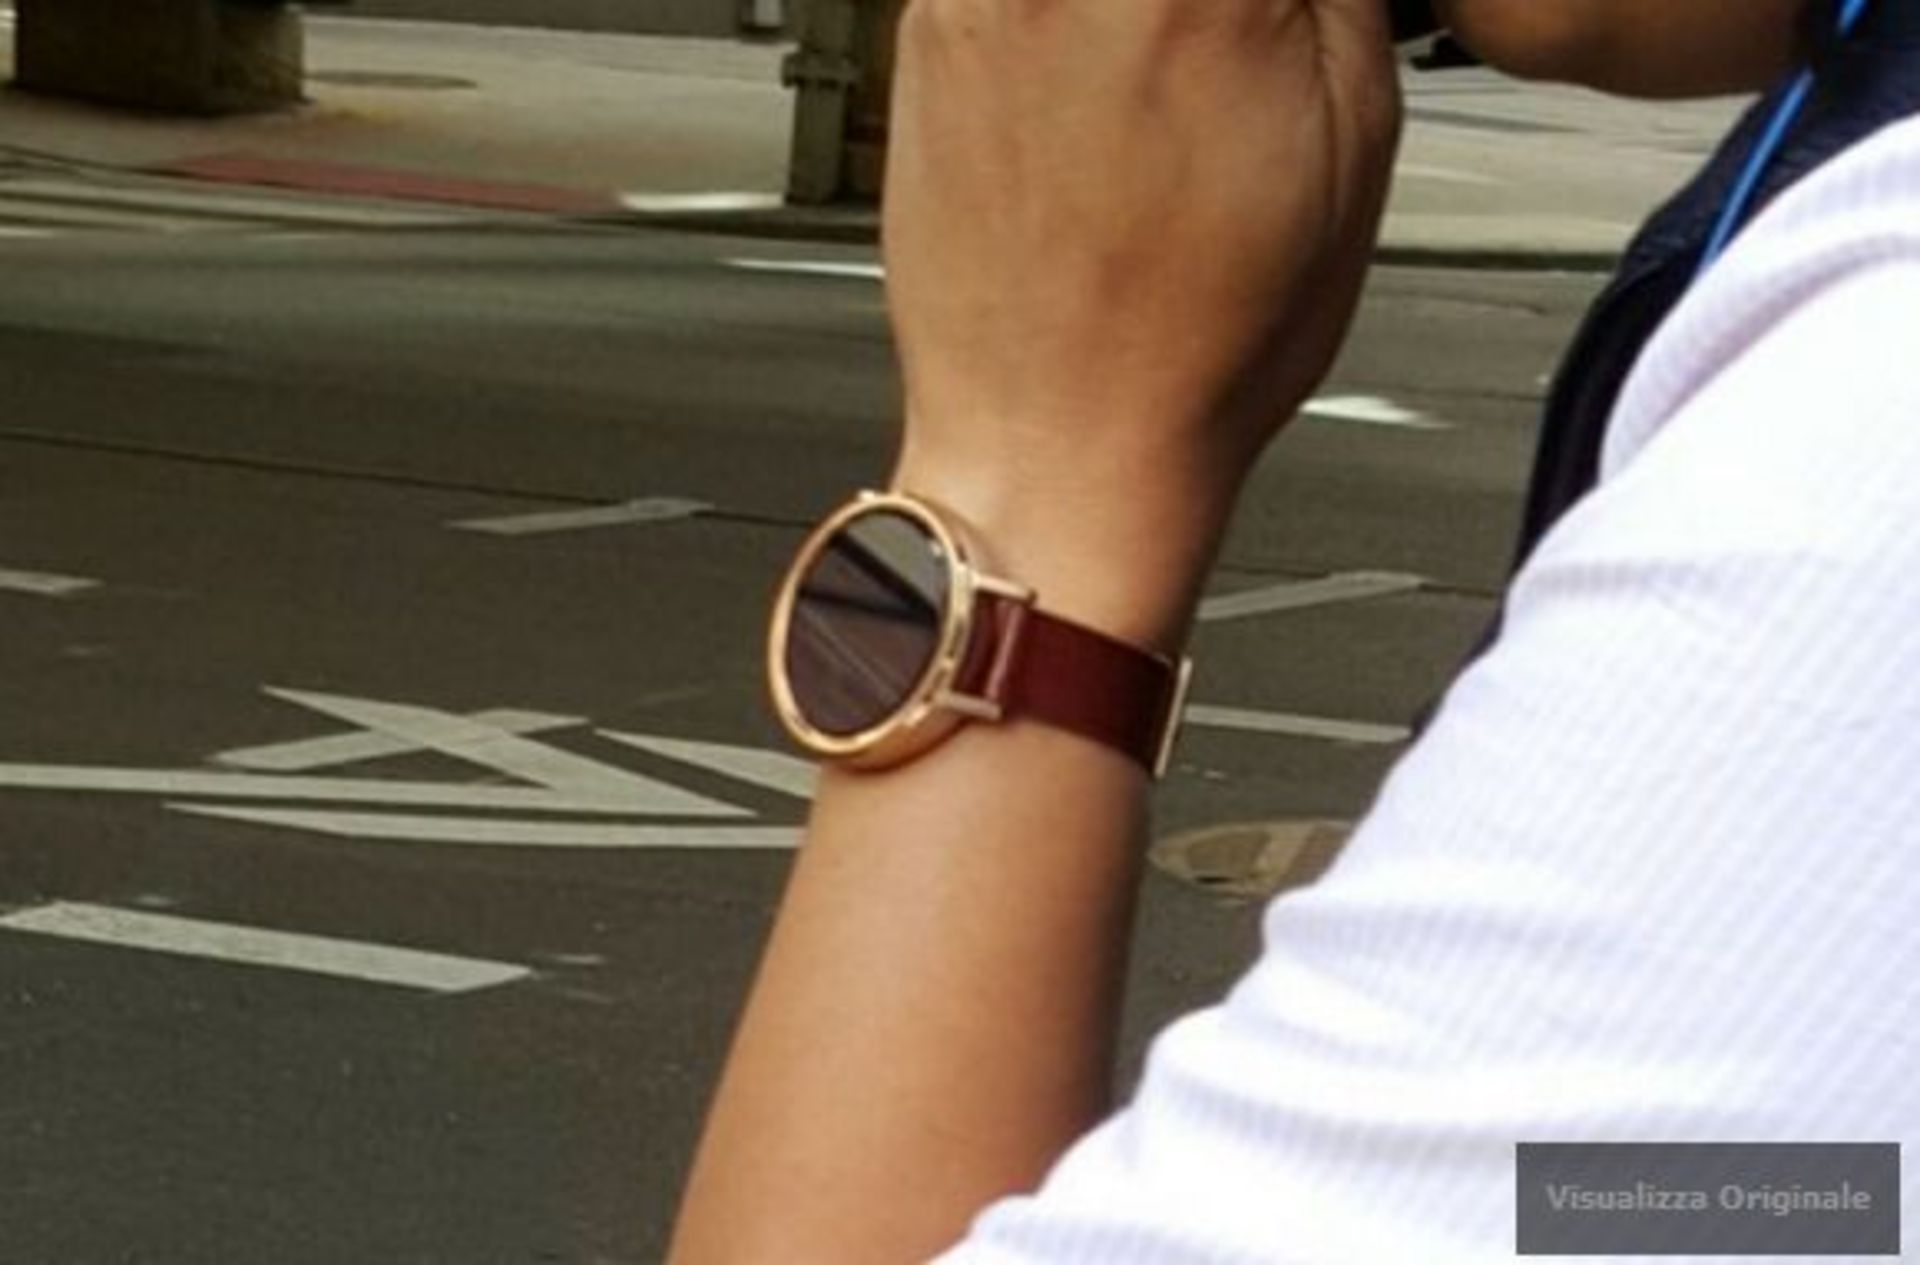 Leaked images of the Motorola Moto 360 sequel and the casing for the timepiece